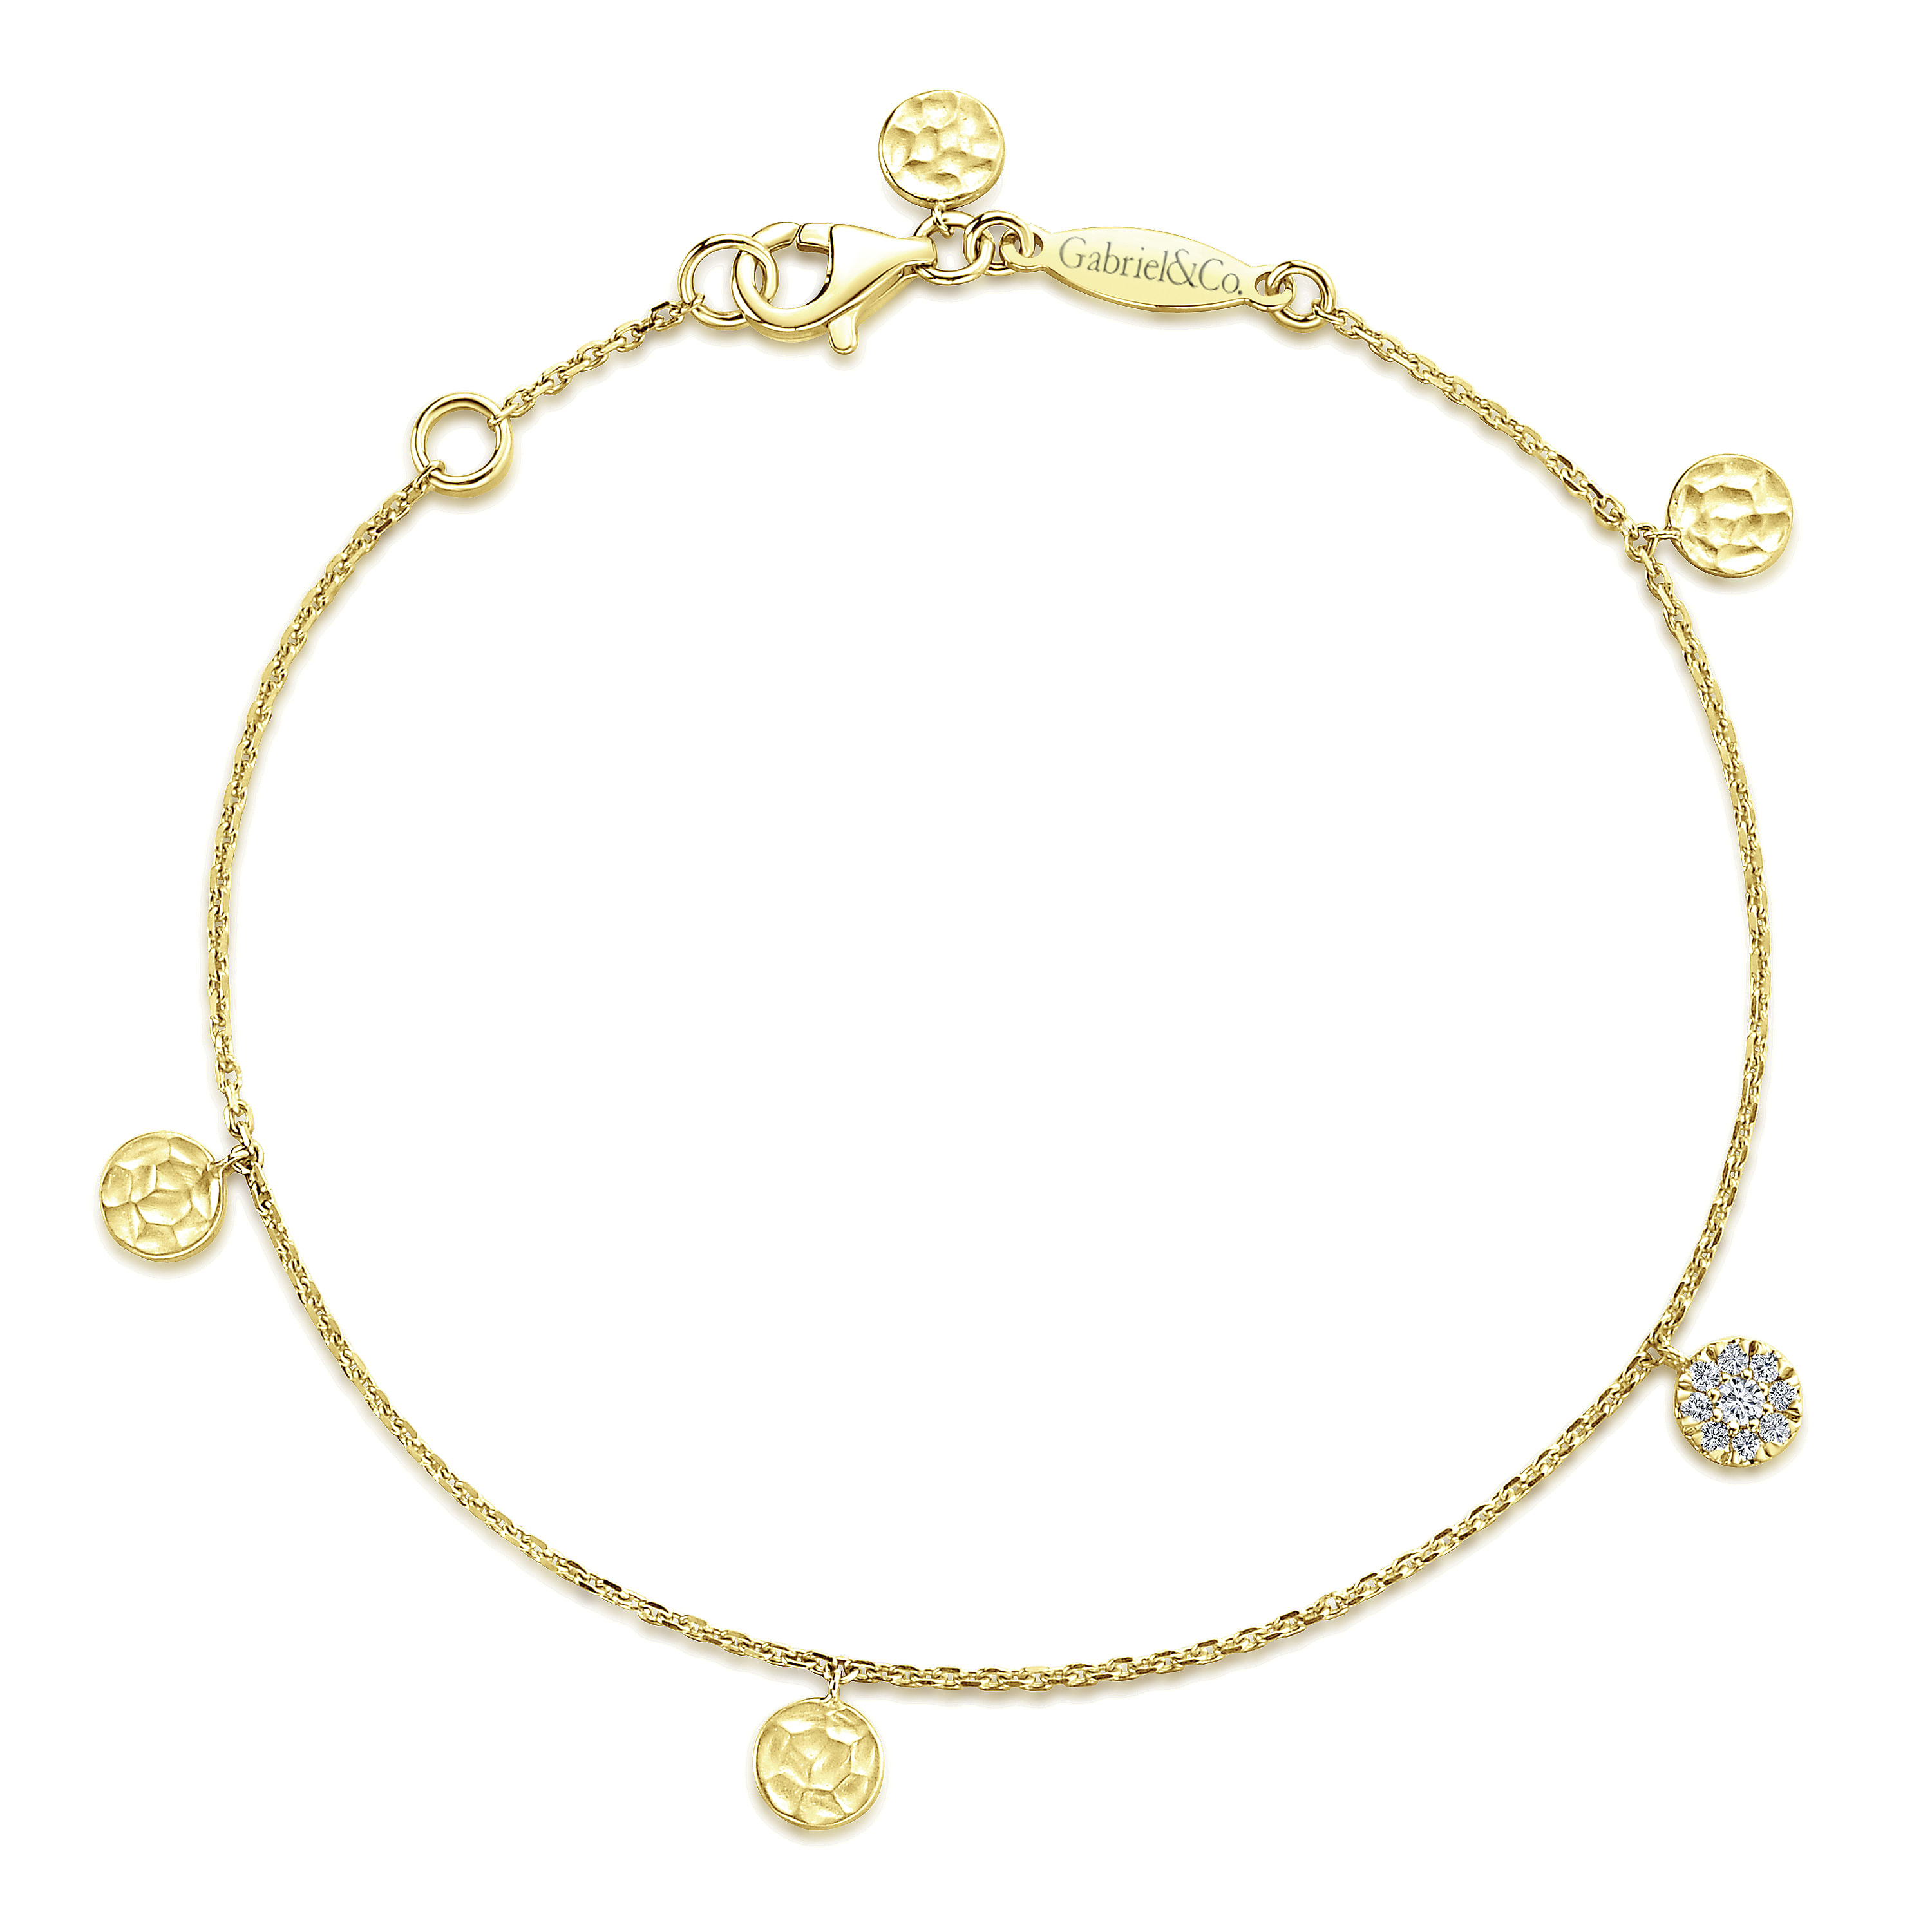 Gabriel - 14K Yellow Gold Chain Bracelet with Hammered and Pavé Diamond Discs